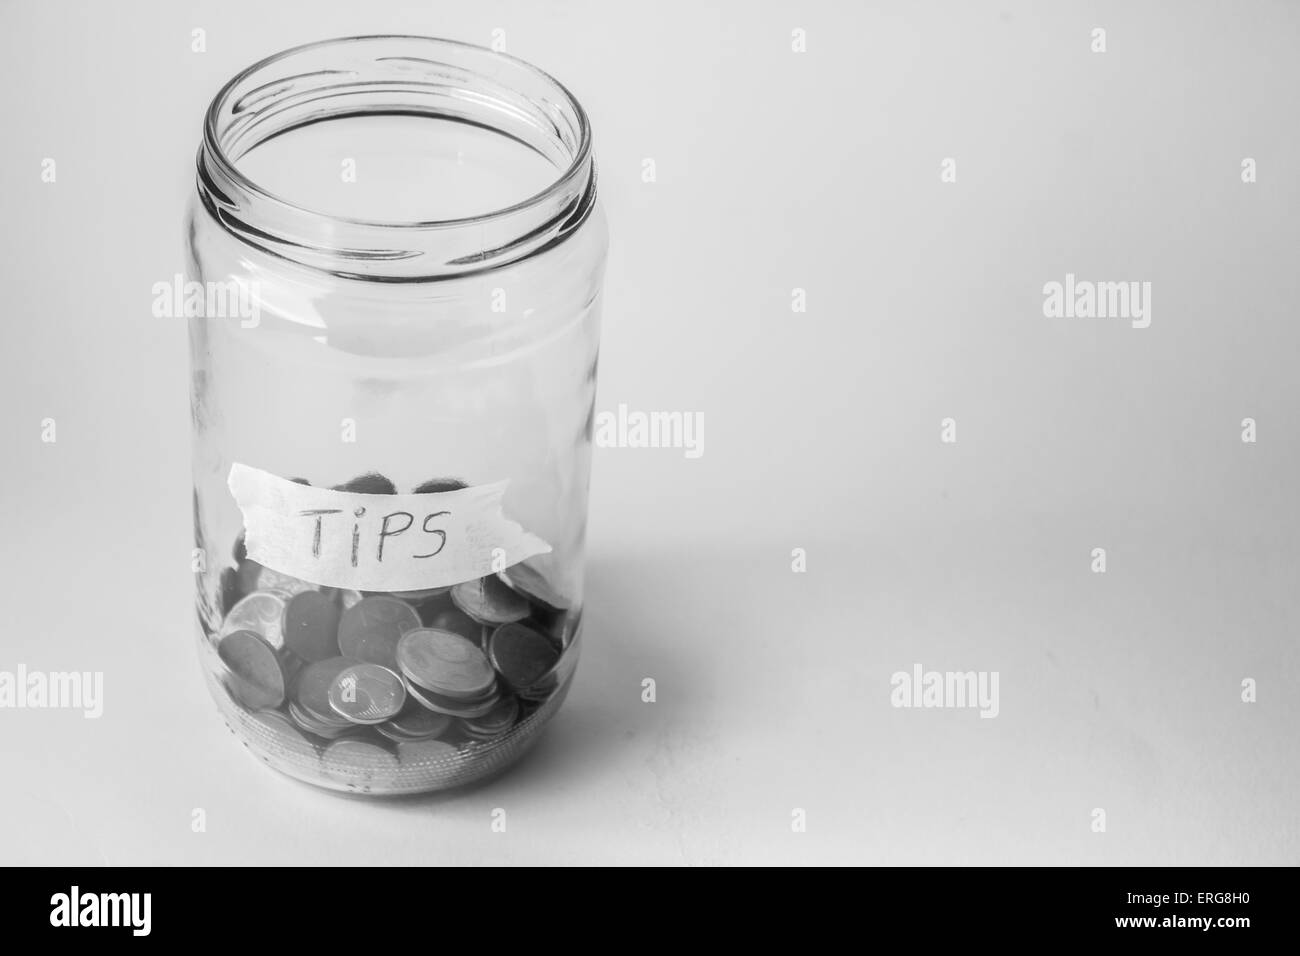 Jar for tips with euro cents coins. Stock Photo